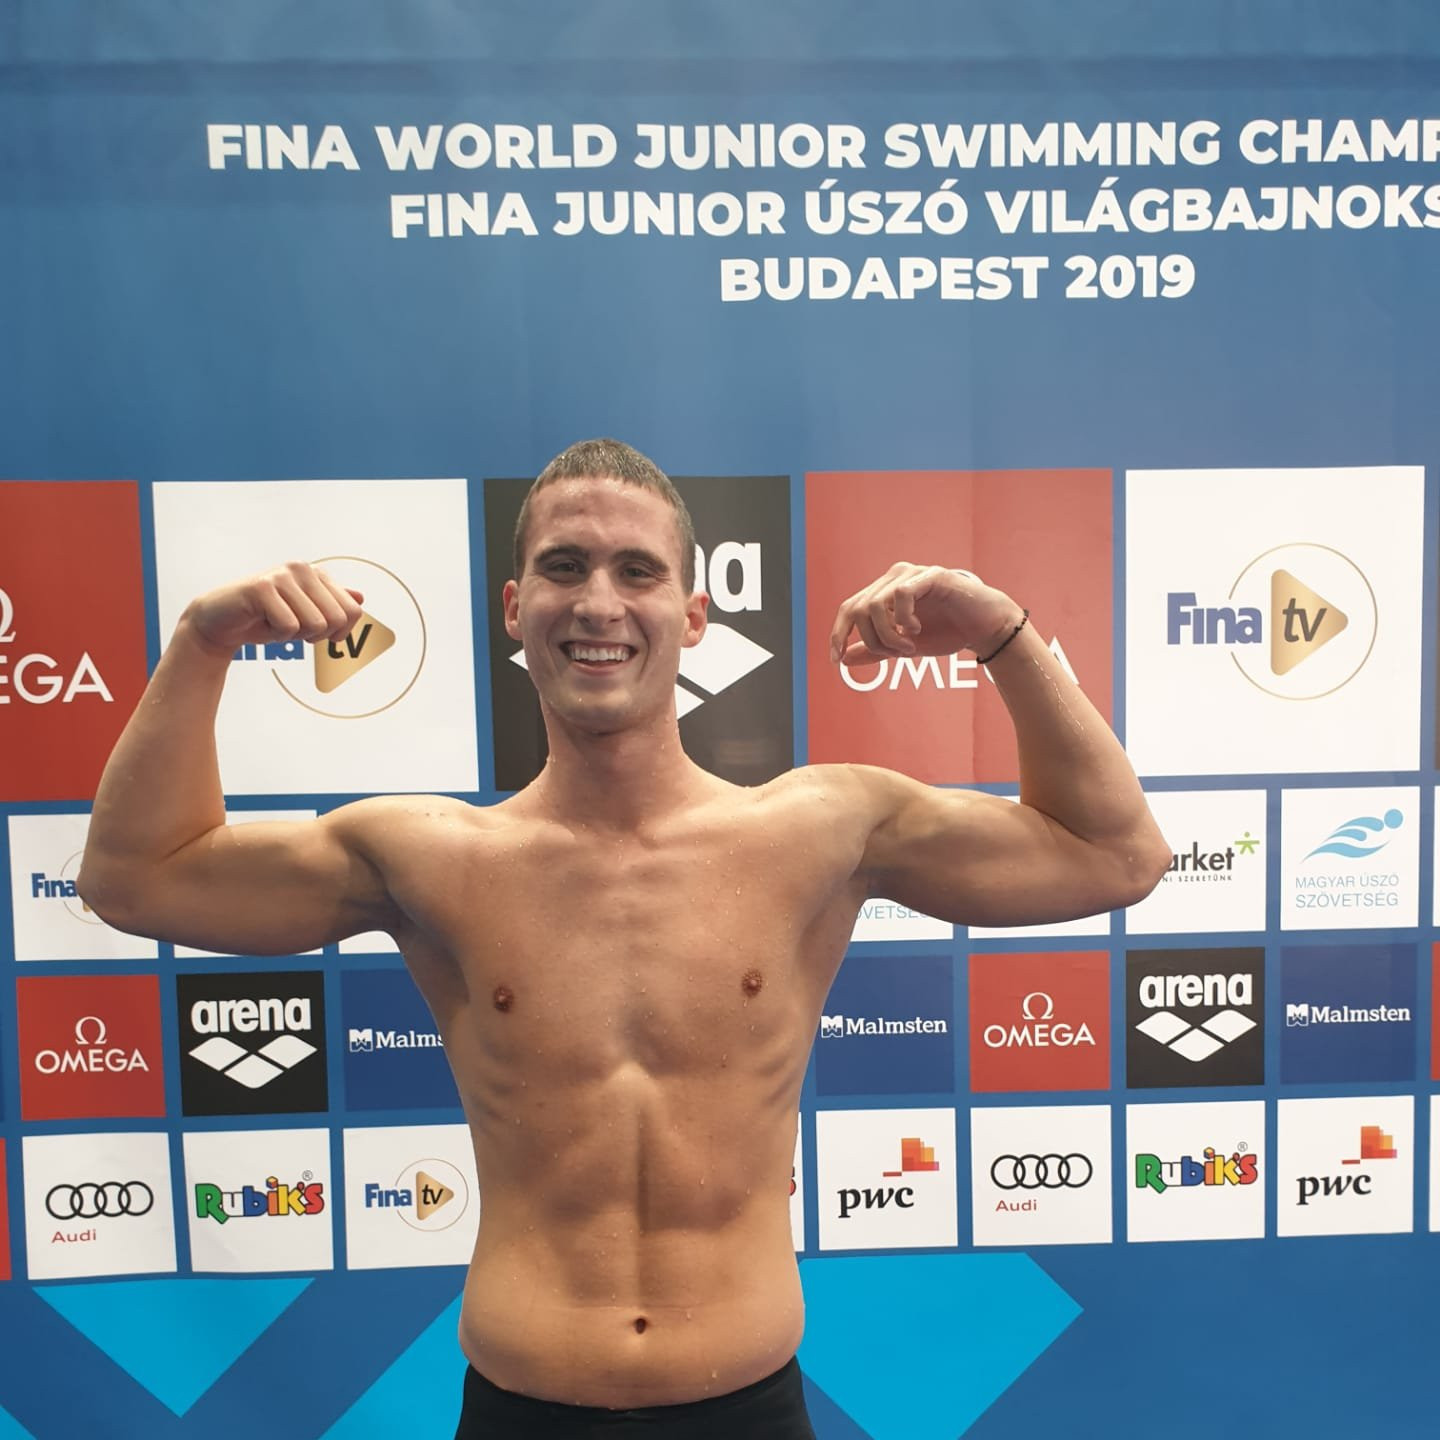 Apostolos Papastamos of Greece set a junior world record to win the 400m medley title in Budapest ©FINA